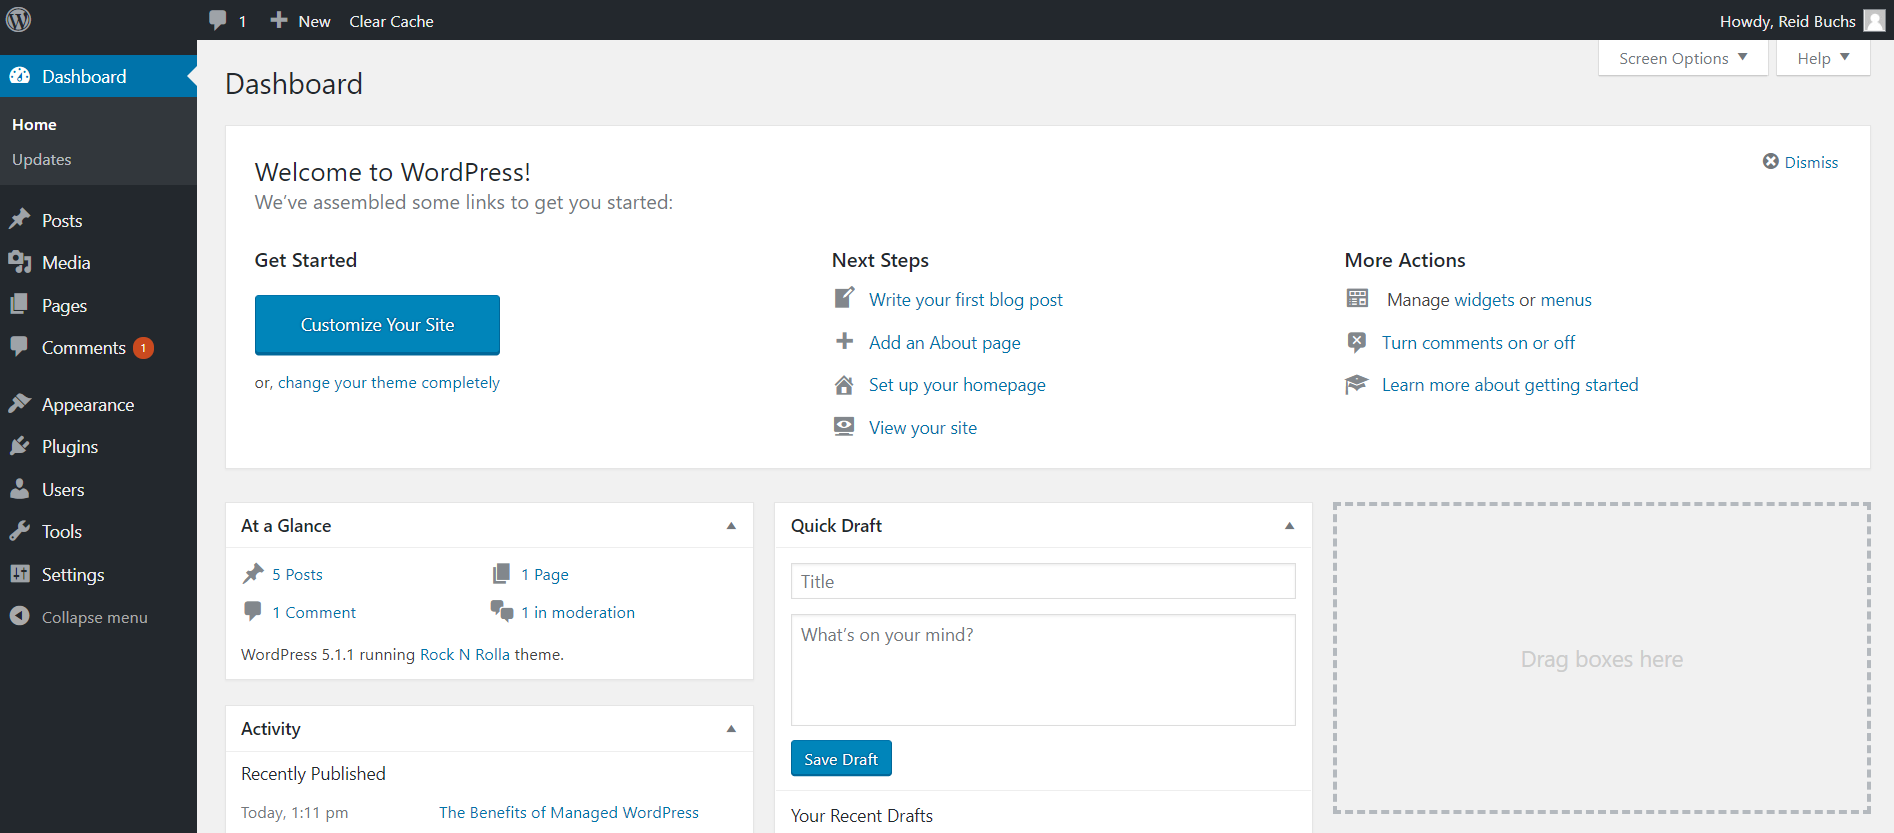 With EasyWP, you get the familiar experience of a WordPress dashboard.